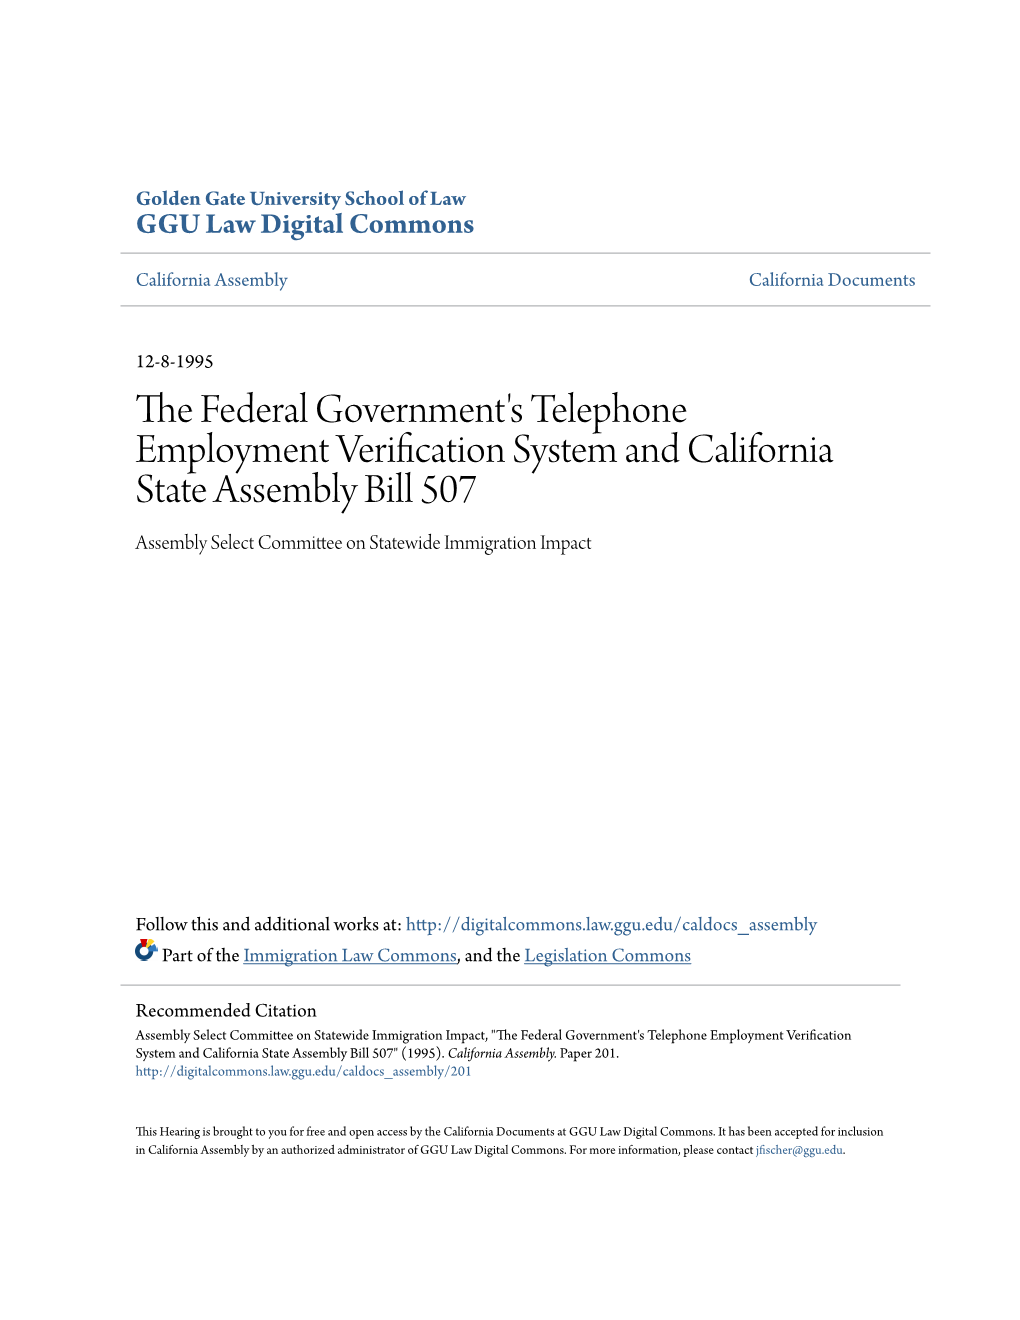 The Federal Government's Telephone Employment Verification System and California State Assembly Bill 507"